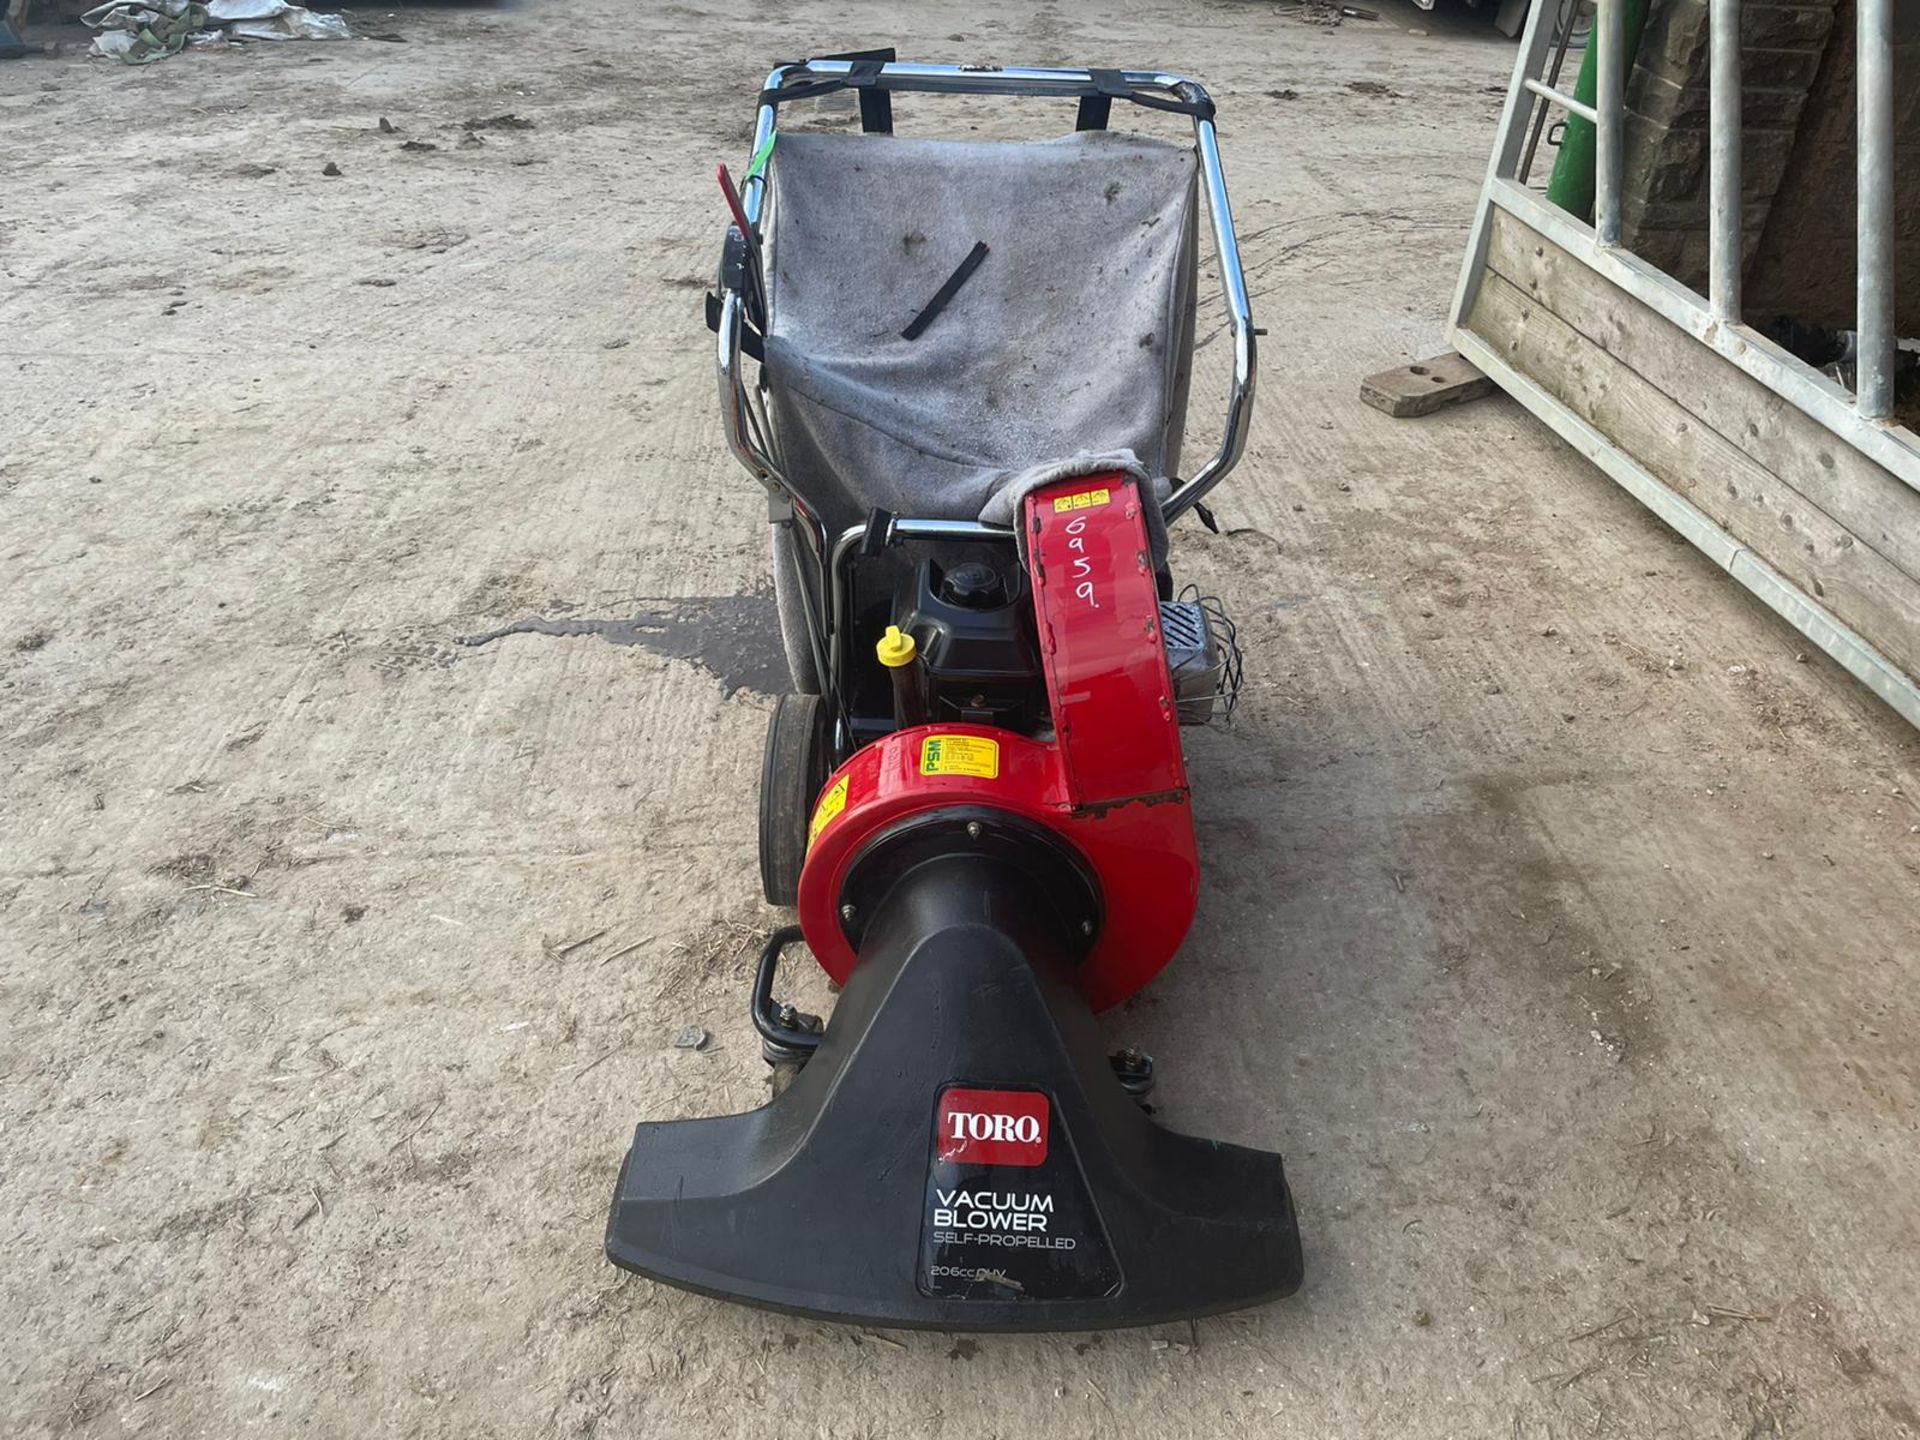 TORO VACCUM BLOWER, SELF PROPELLED, IN USED BUT GOOD CONDITION *PLUS VAT* - Image 7 of 7